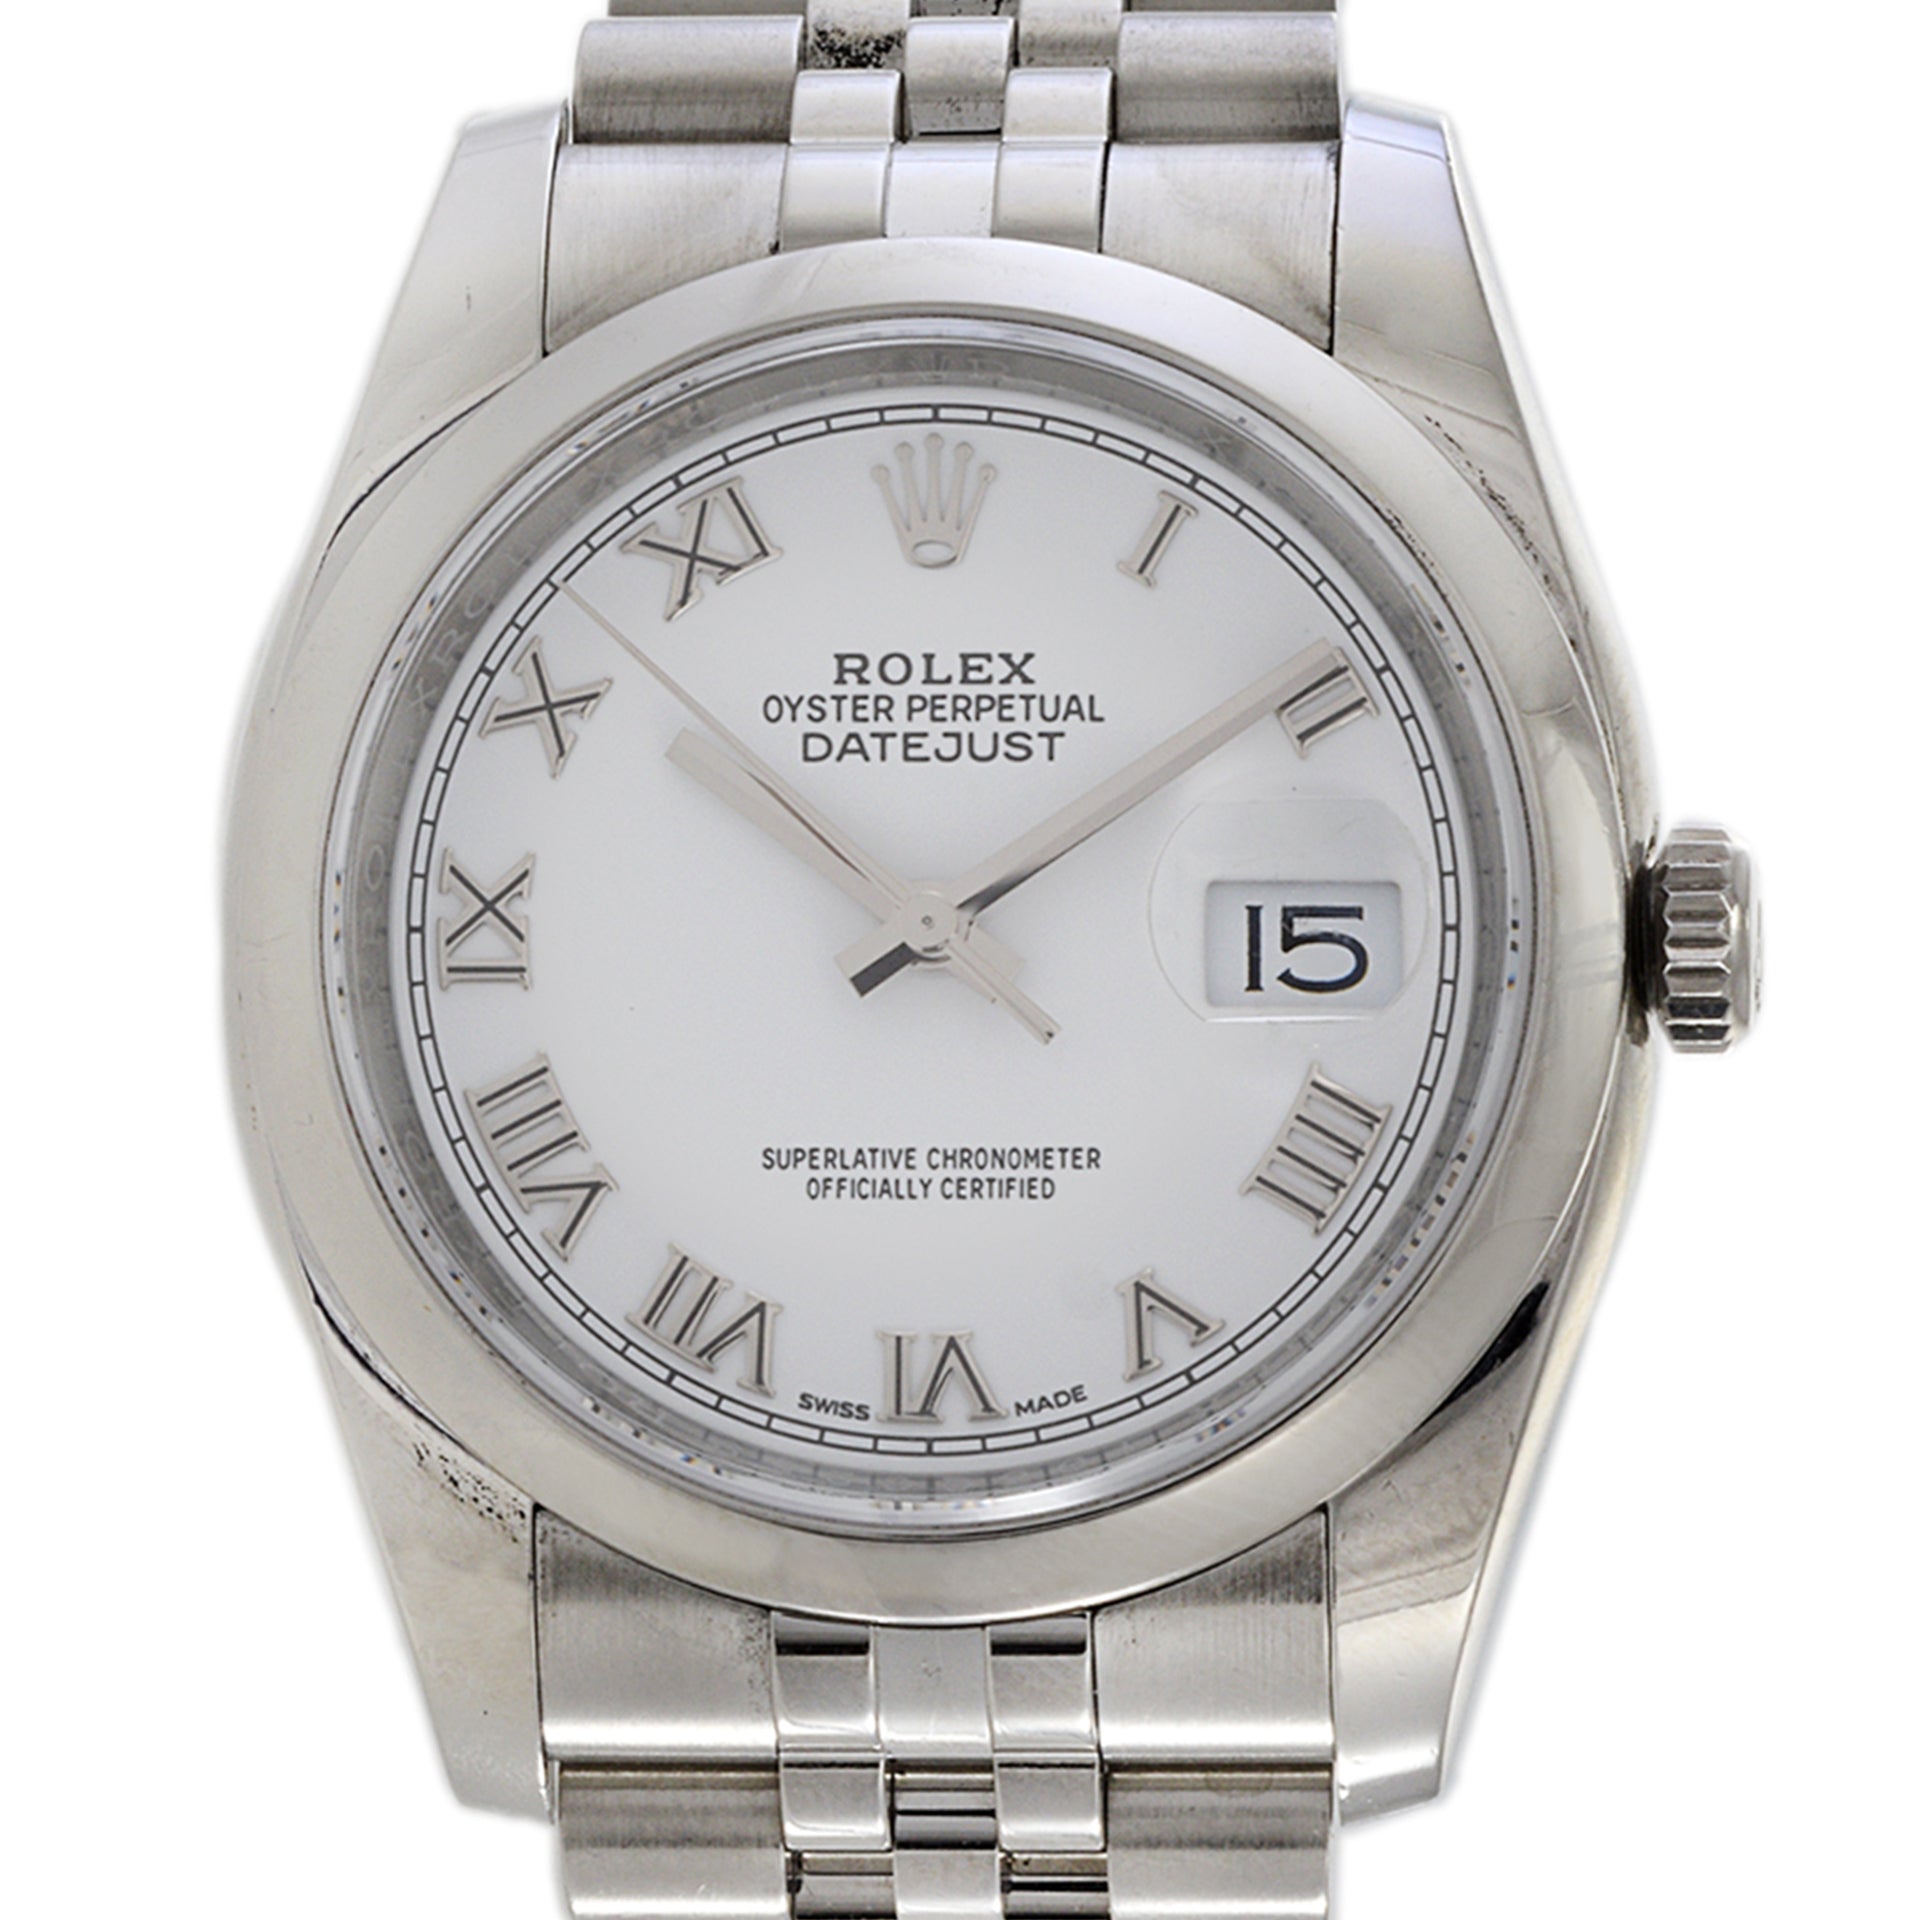 Rolex Datejust 36 Reference 116200